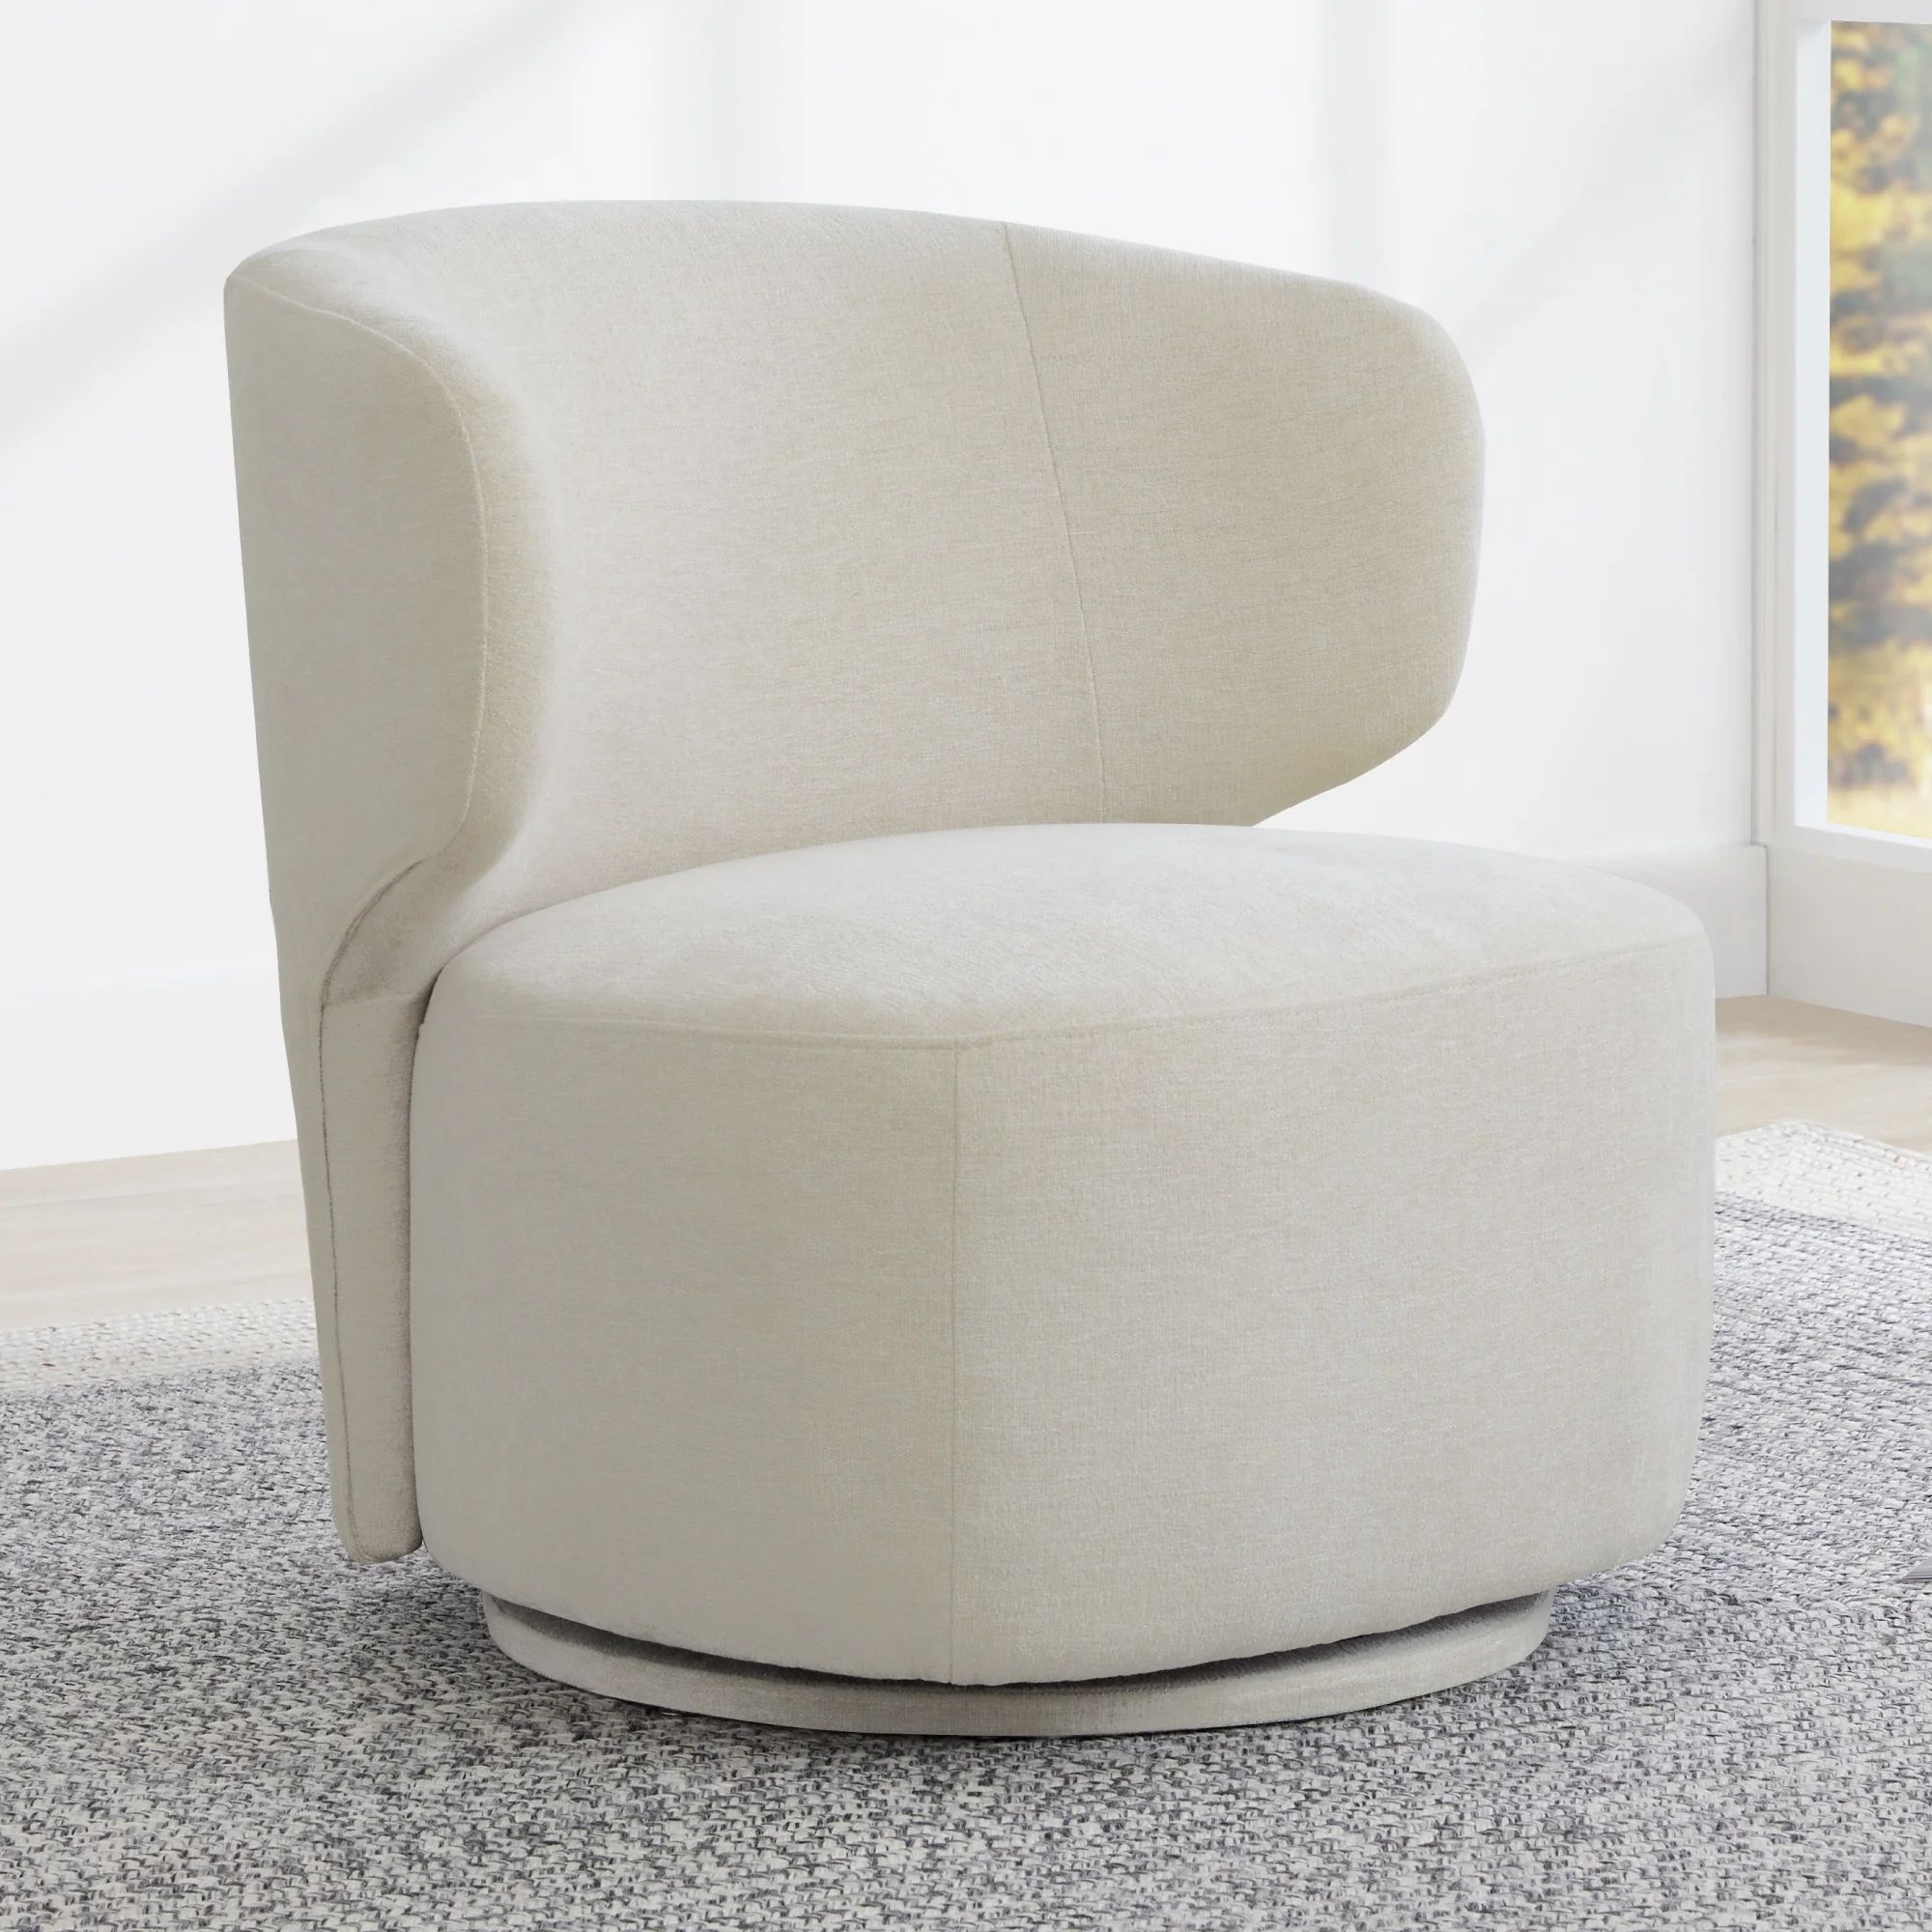 CHITA Modern Swivel Accent Chairs, Upholstered Living Room Chair, Fabric in Cream | Walmart (US)